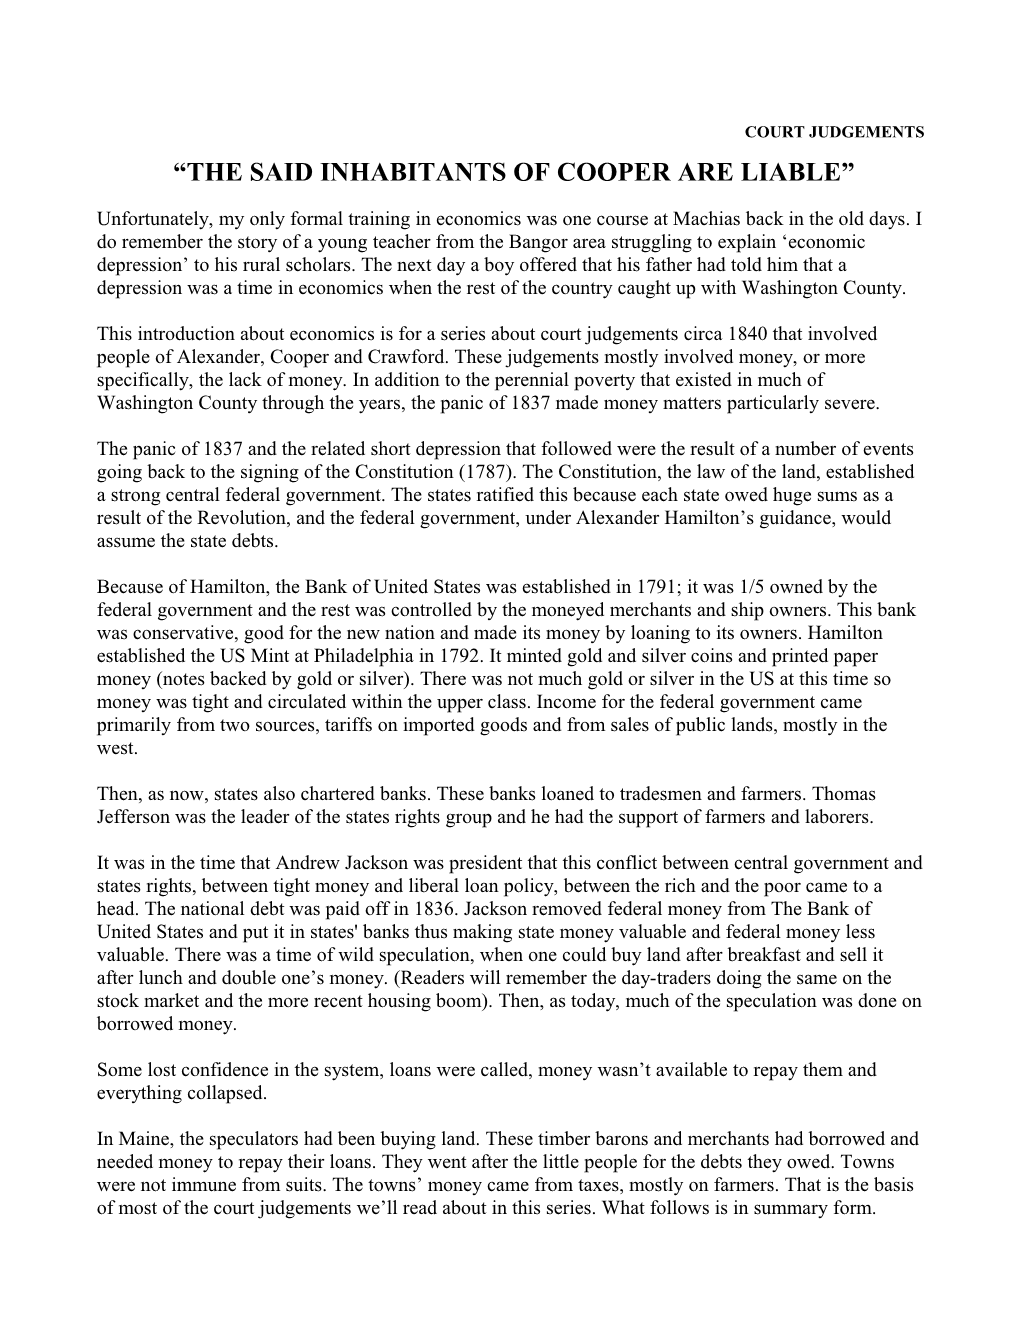 The Said Inhabitants of Cooper Are Liable